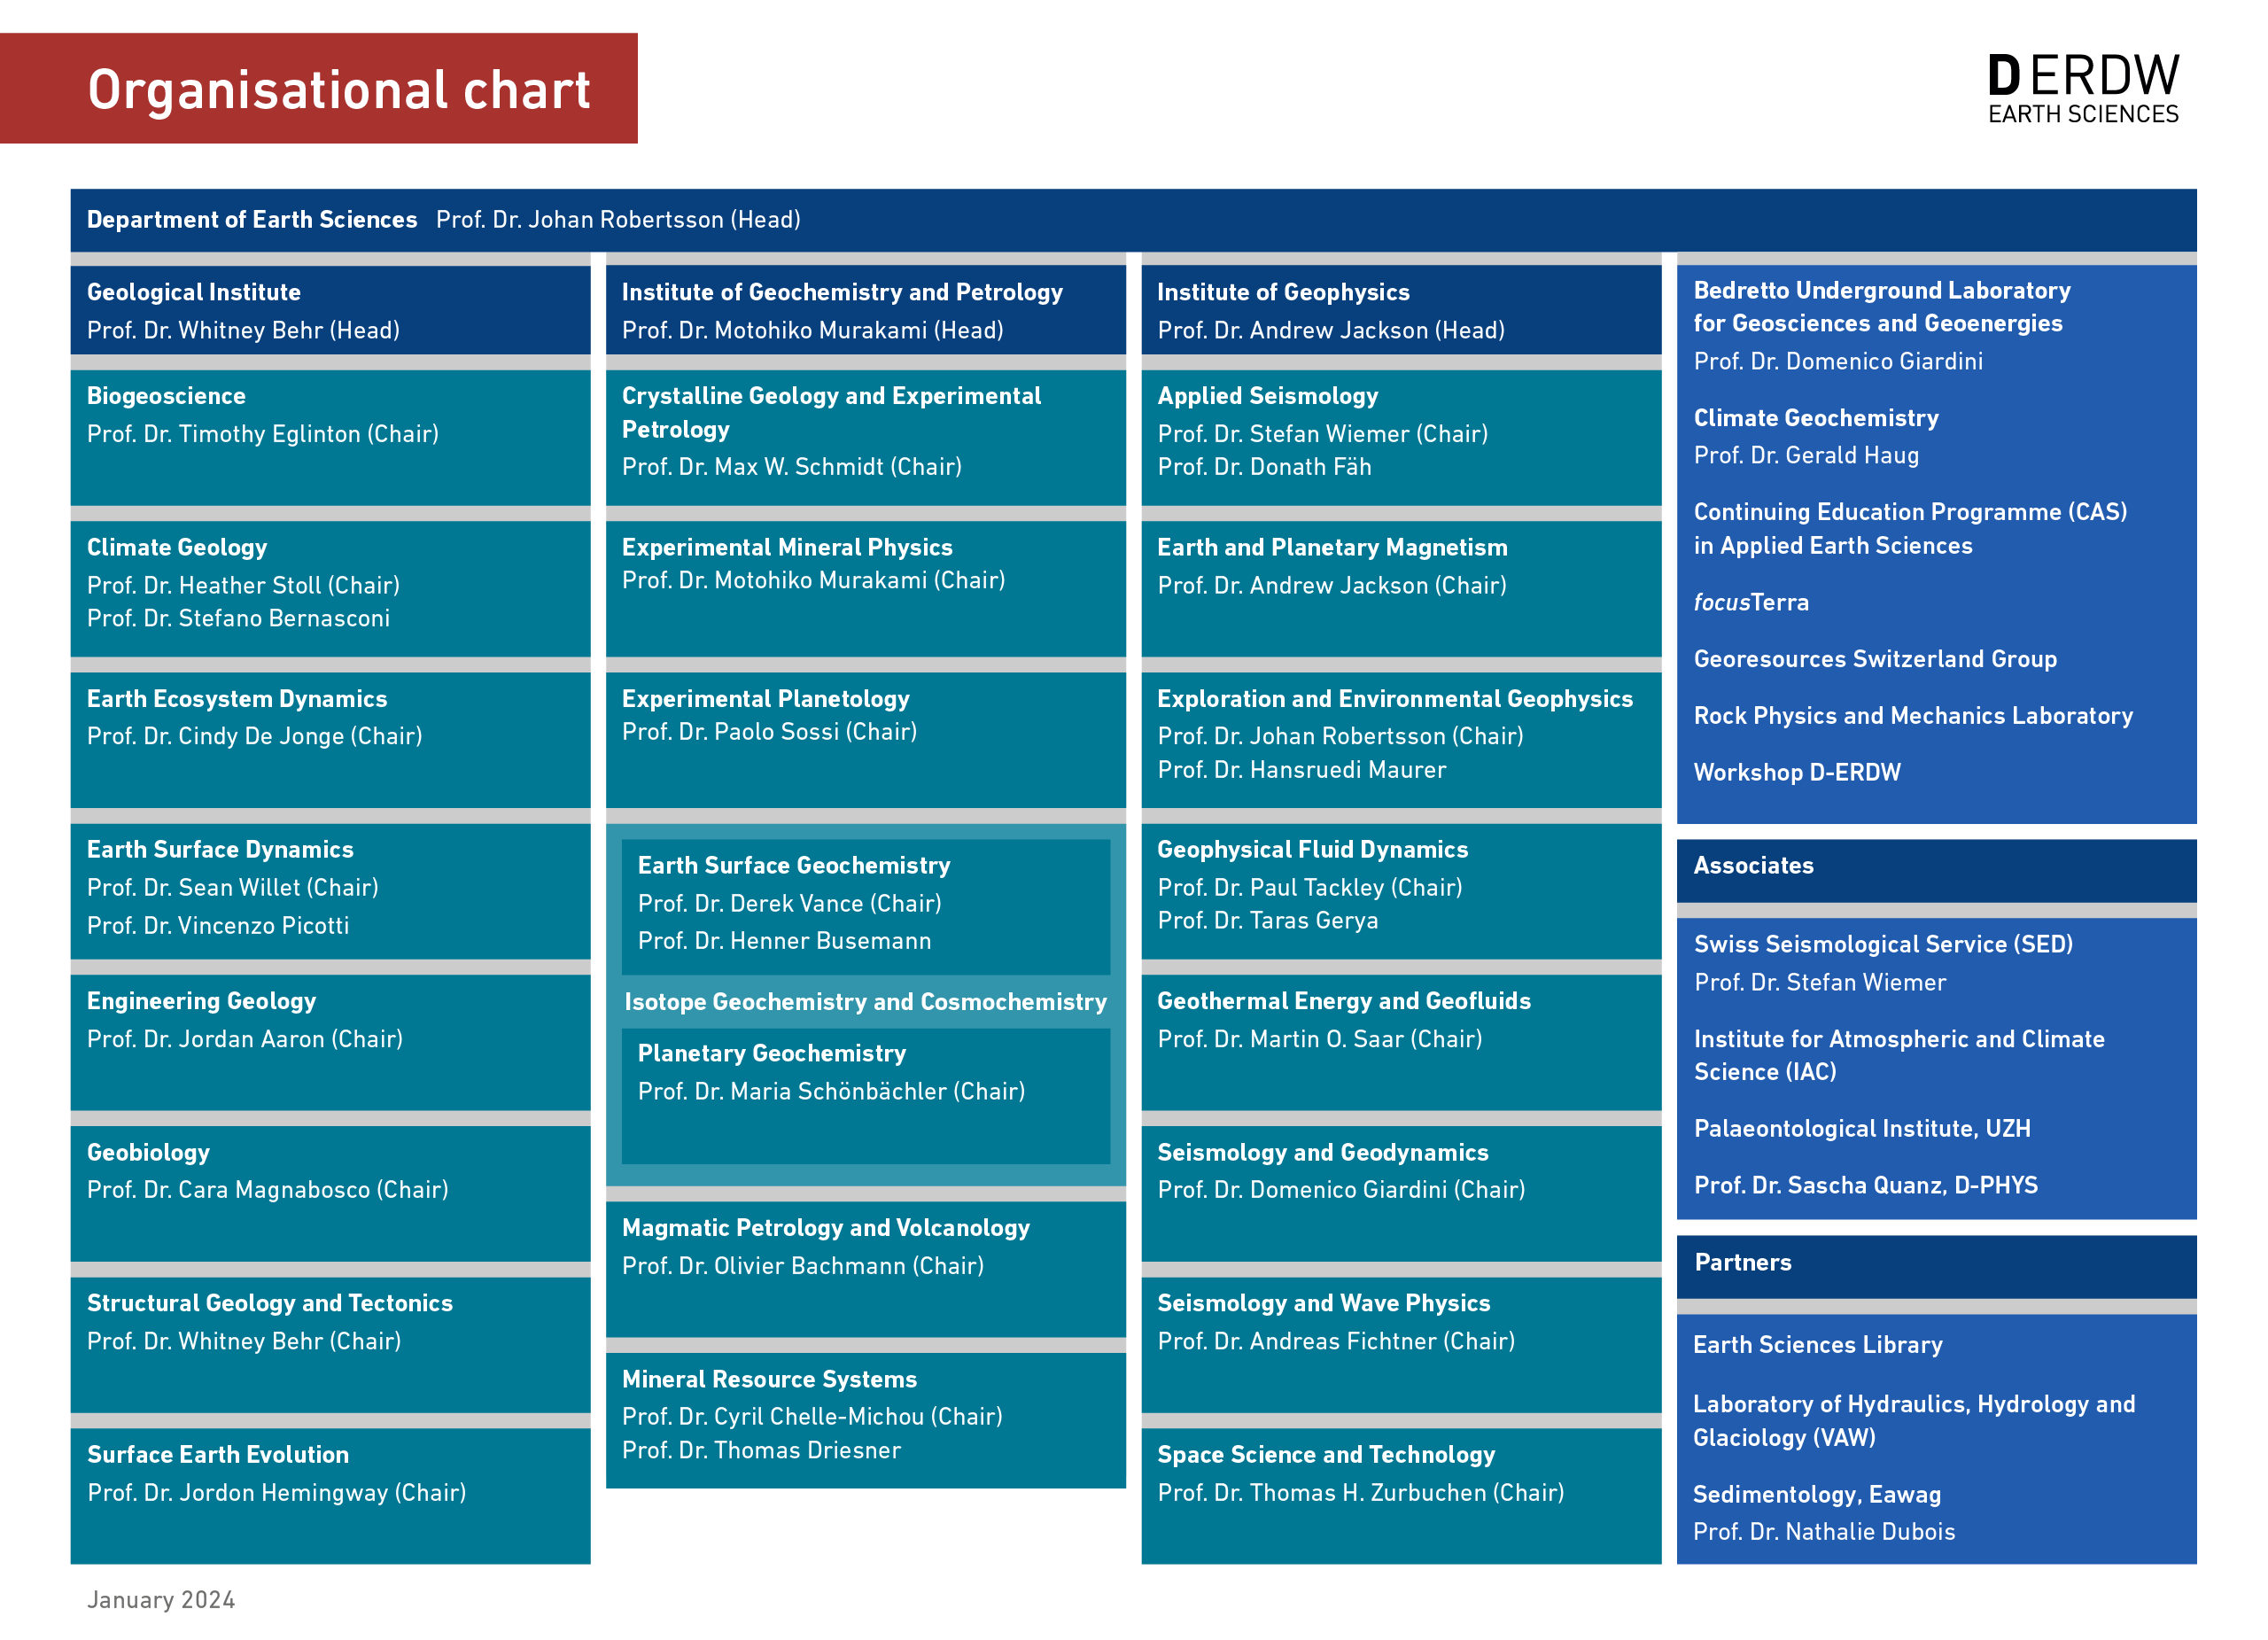 Enlarged view: Organisational chart: institutes and research groups at the Department of Earth Sciences